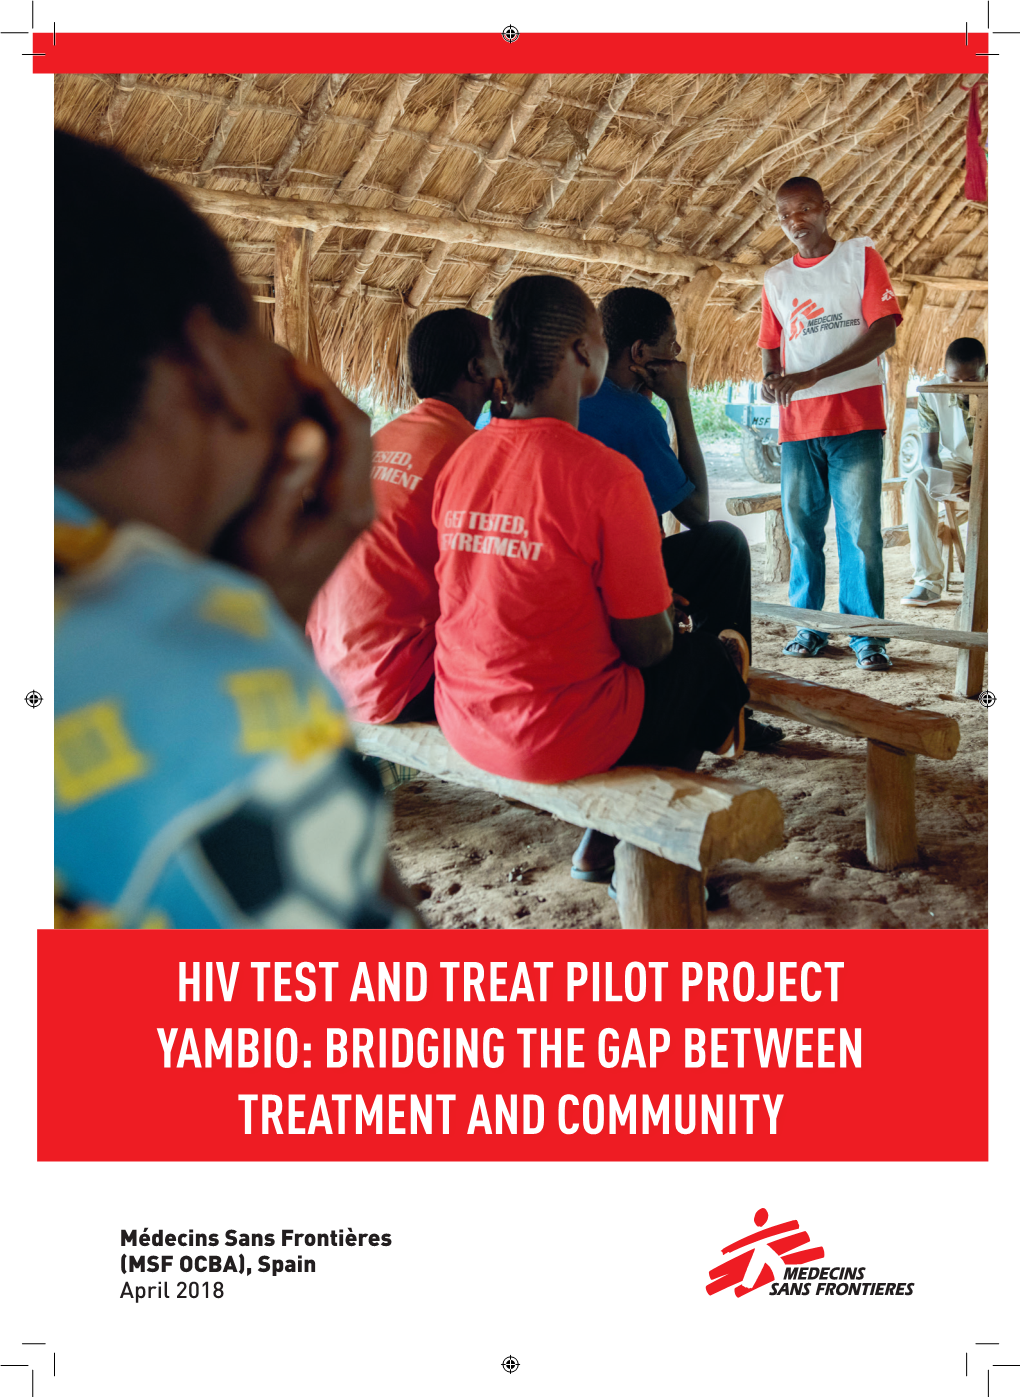 Hiv Test and Treat Pilot Project Yambio: Bridging the Gap Between Treatment and Community